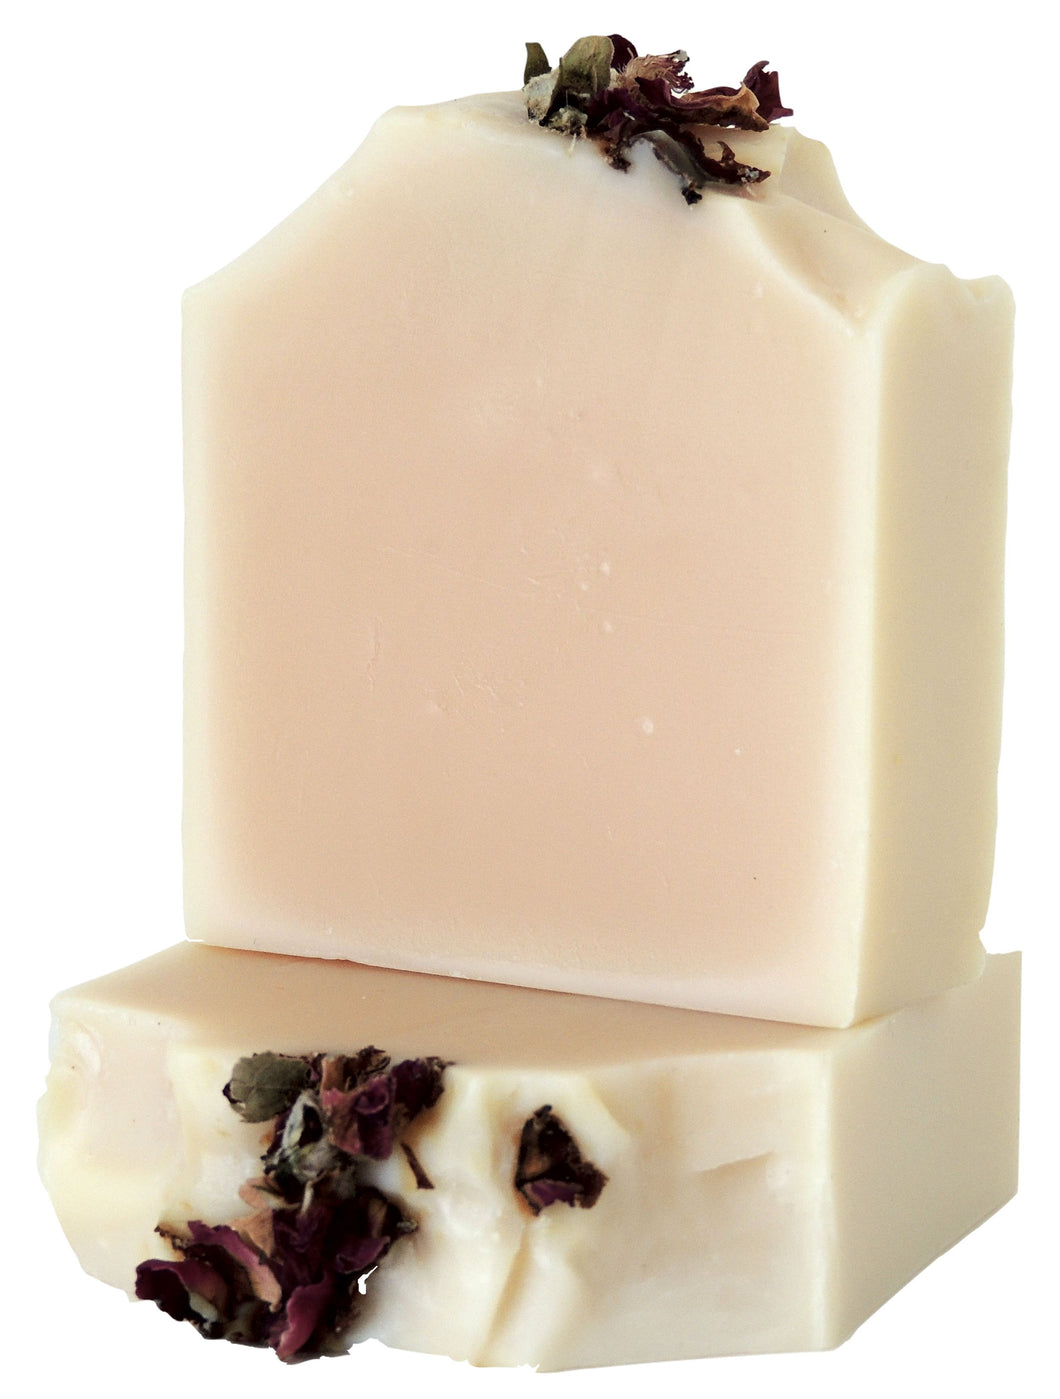 Triple Butter Moisturizing Soap Bars Made in Canada